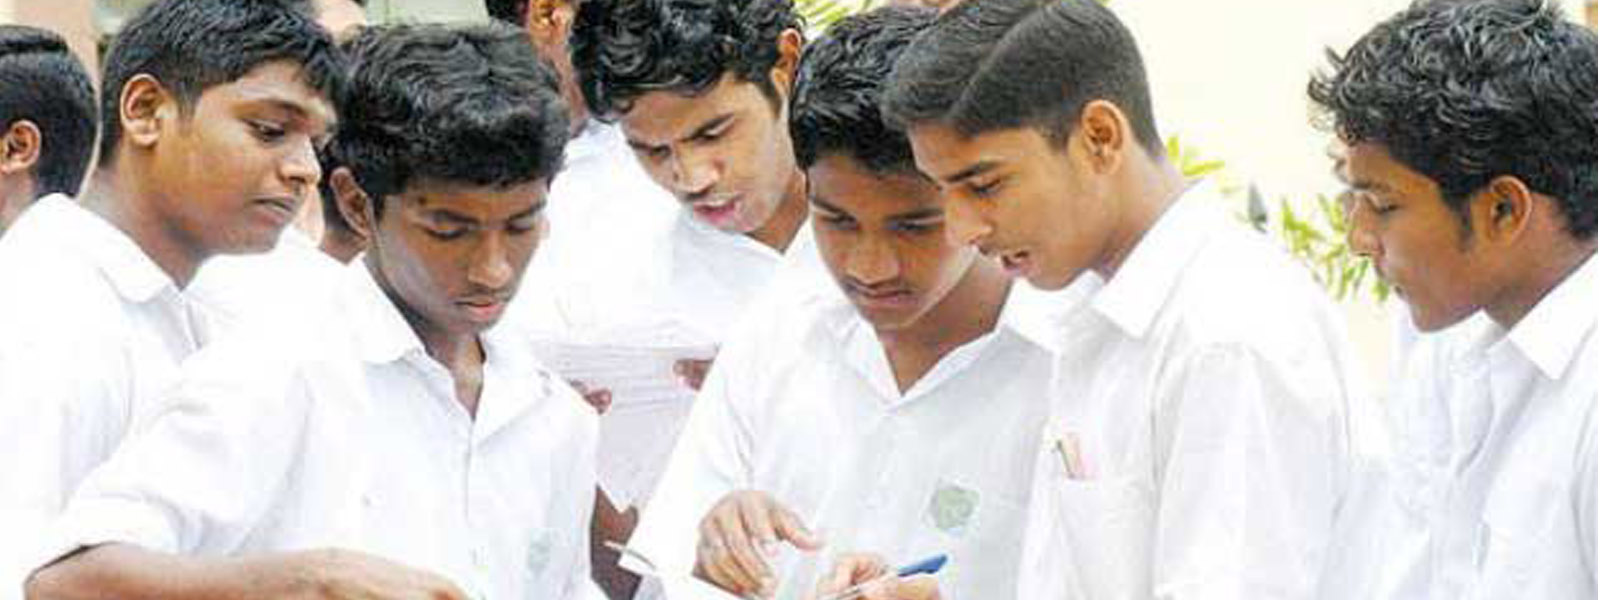 GCE O/L exam results released